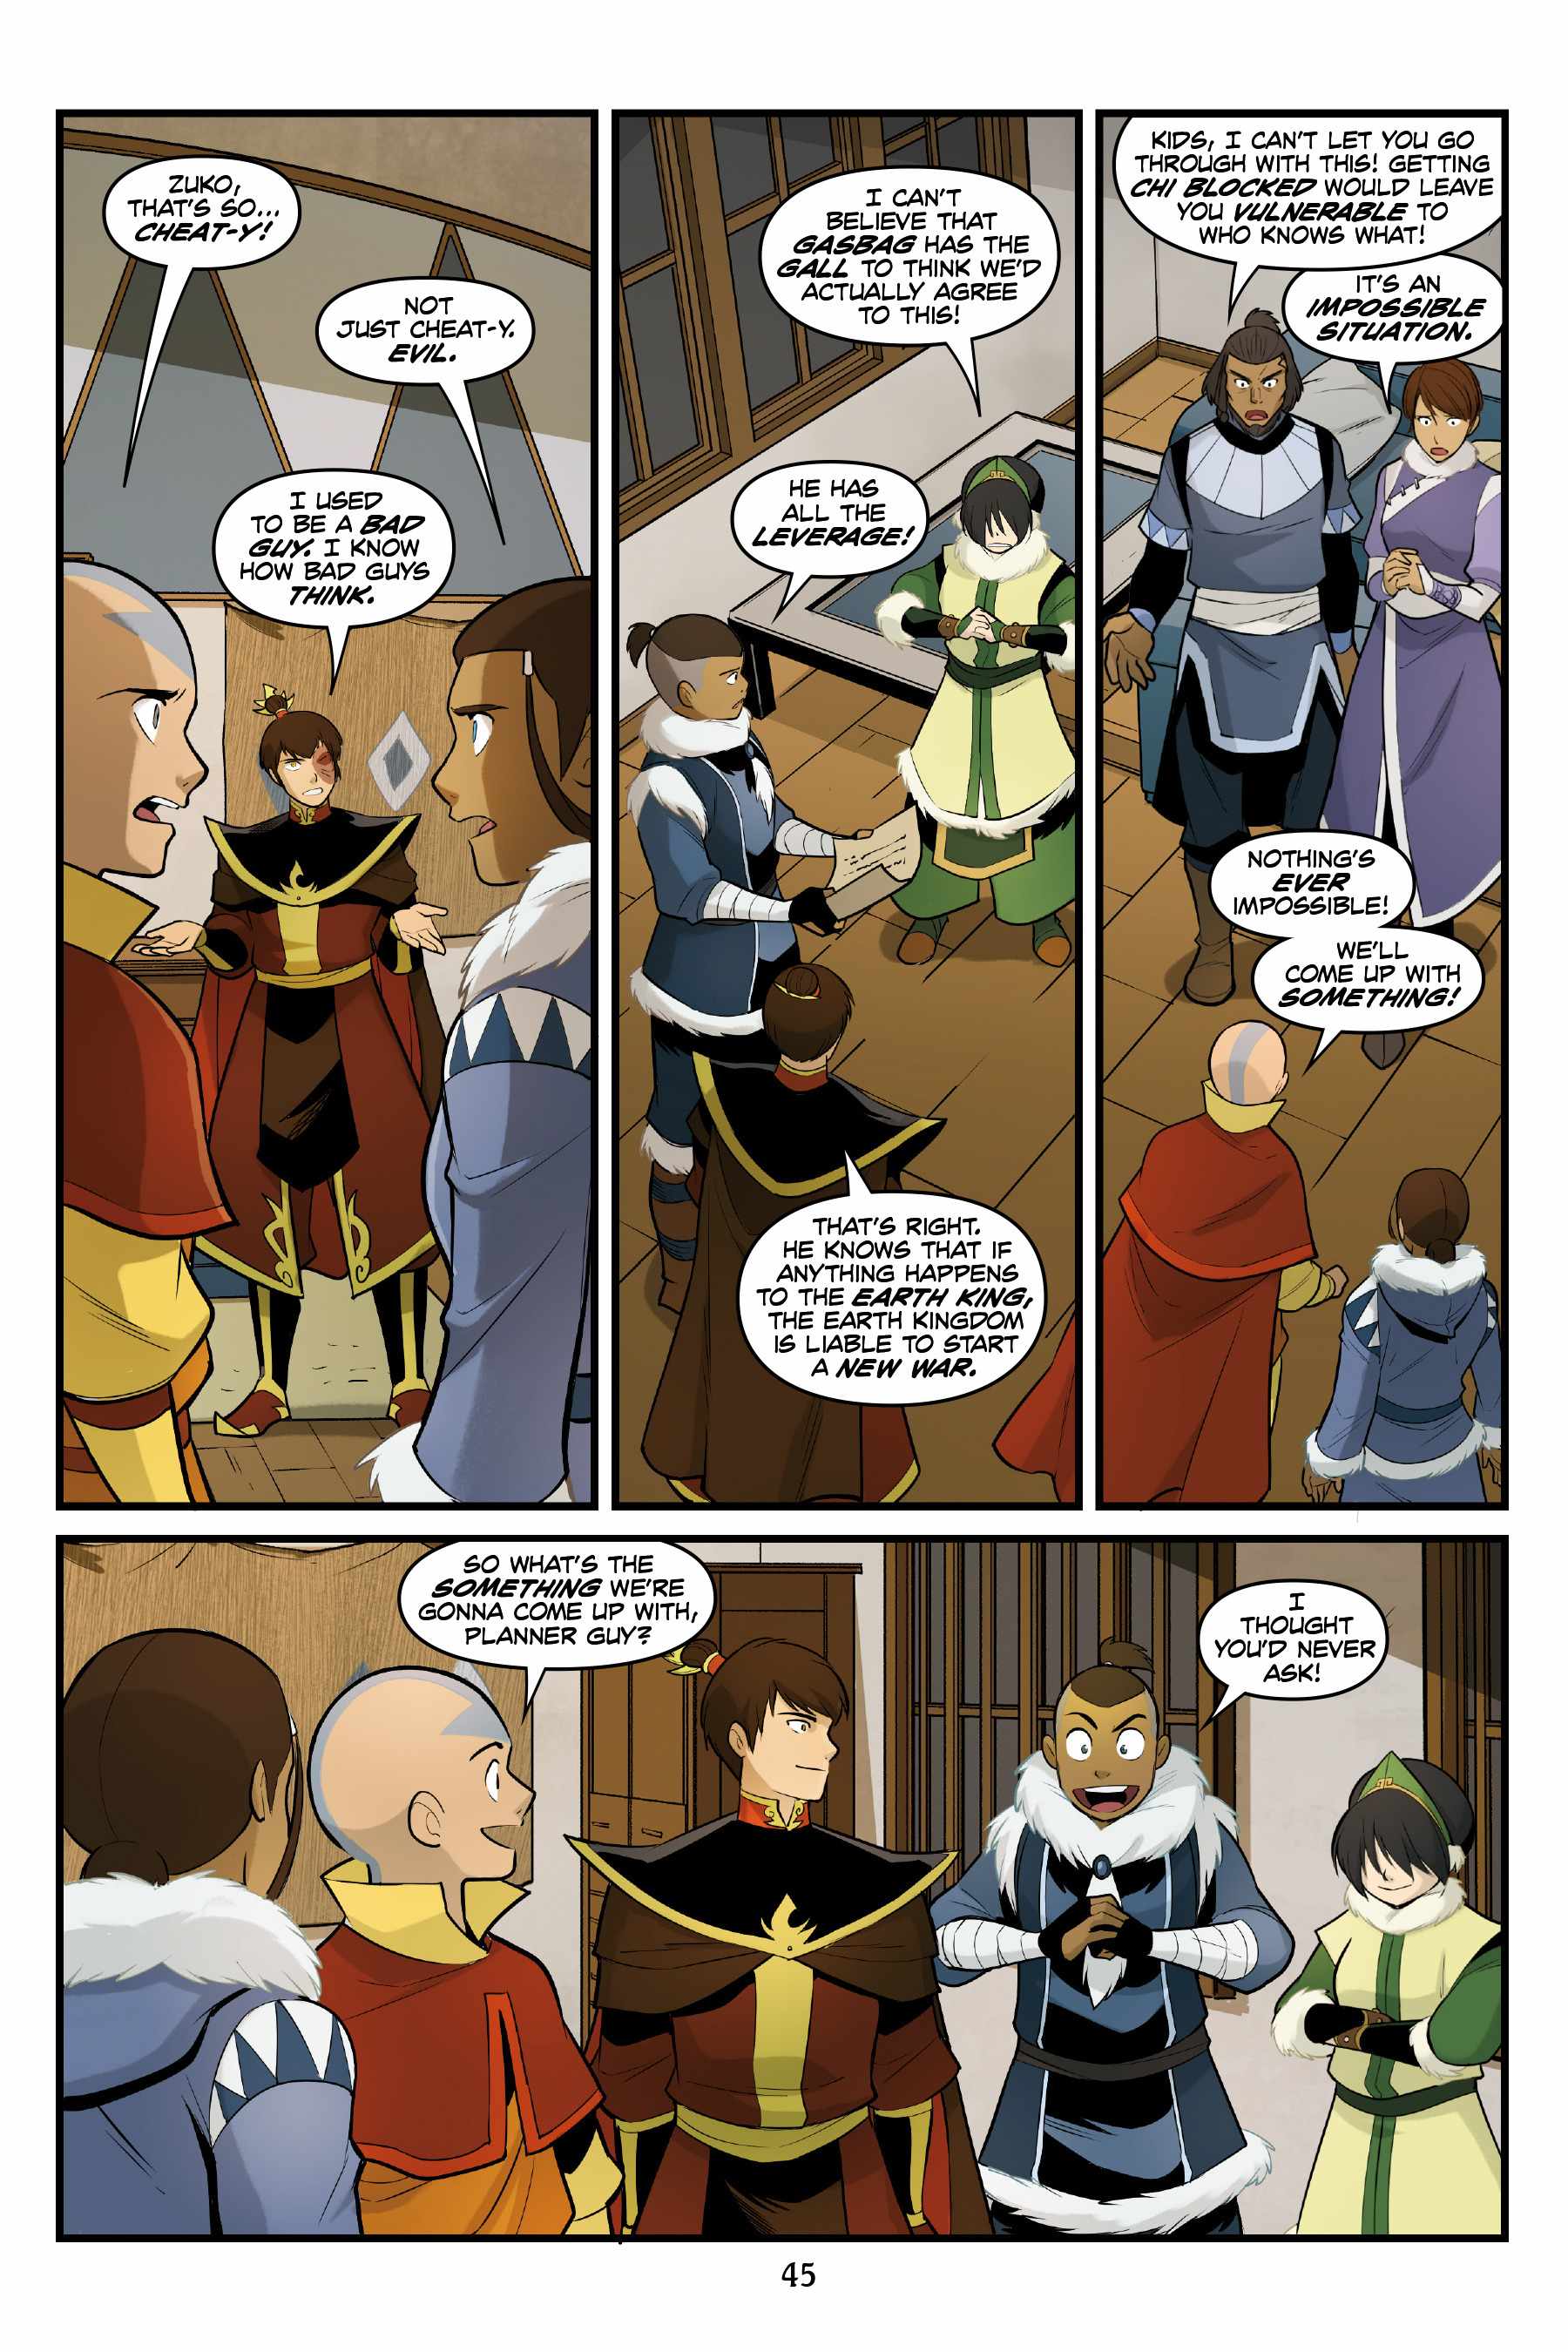 Read Comics Online Free - Avatar The Last Airbender Comic Book Issue #015 -  Page 39